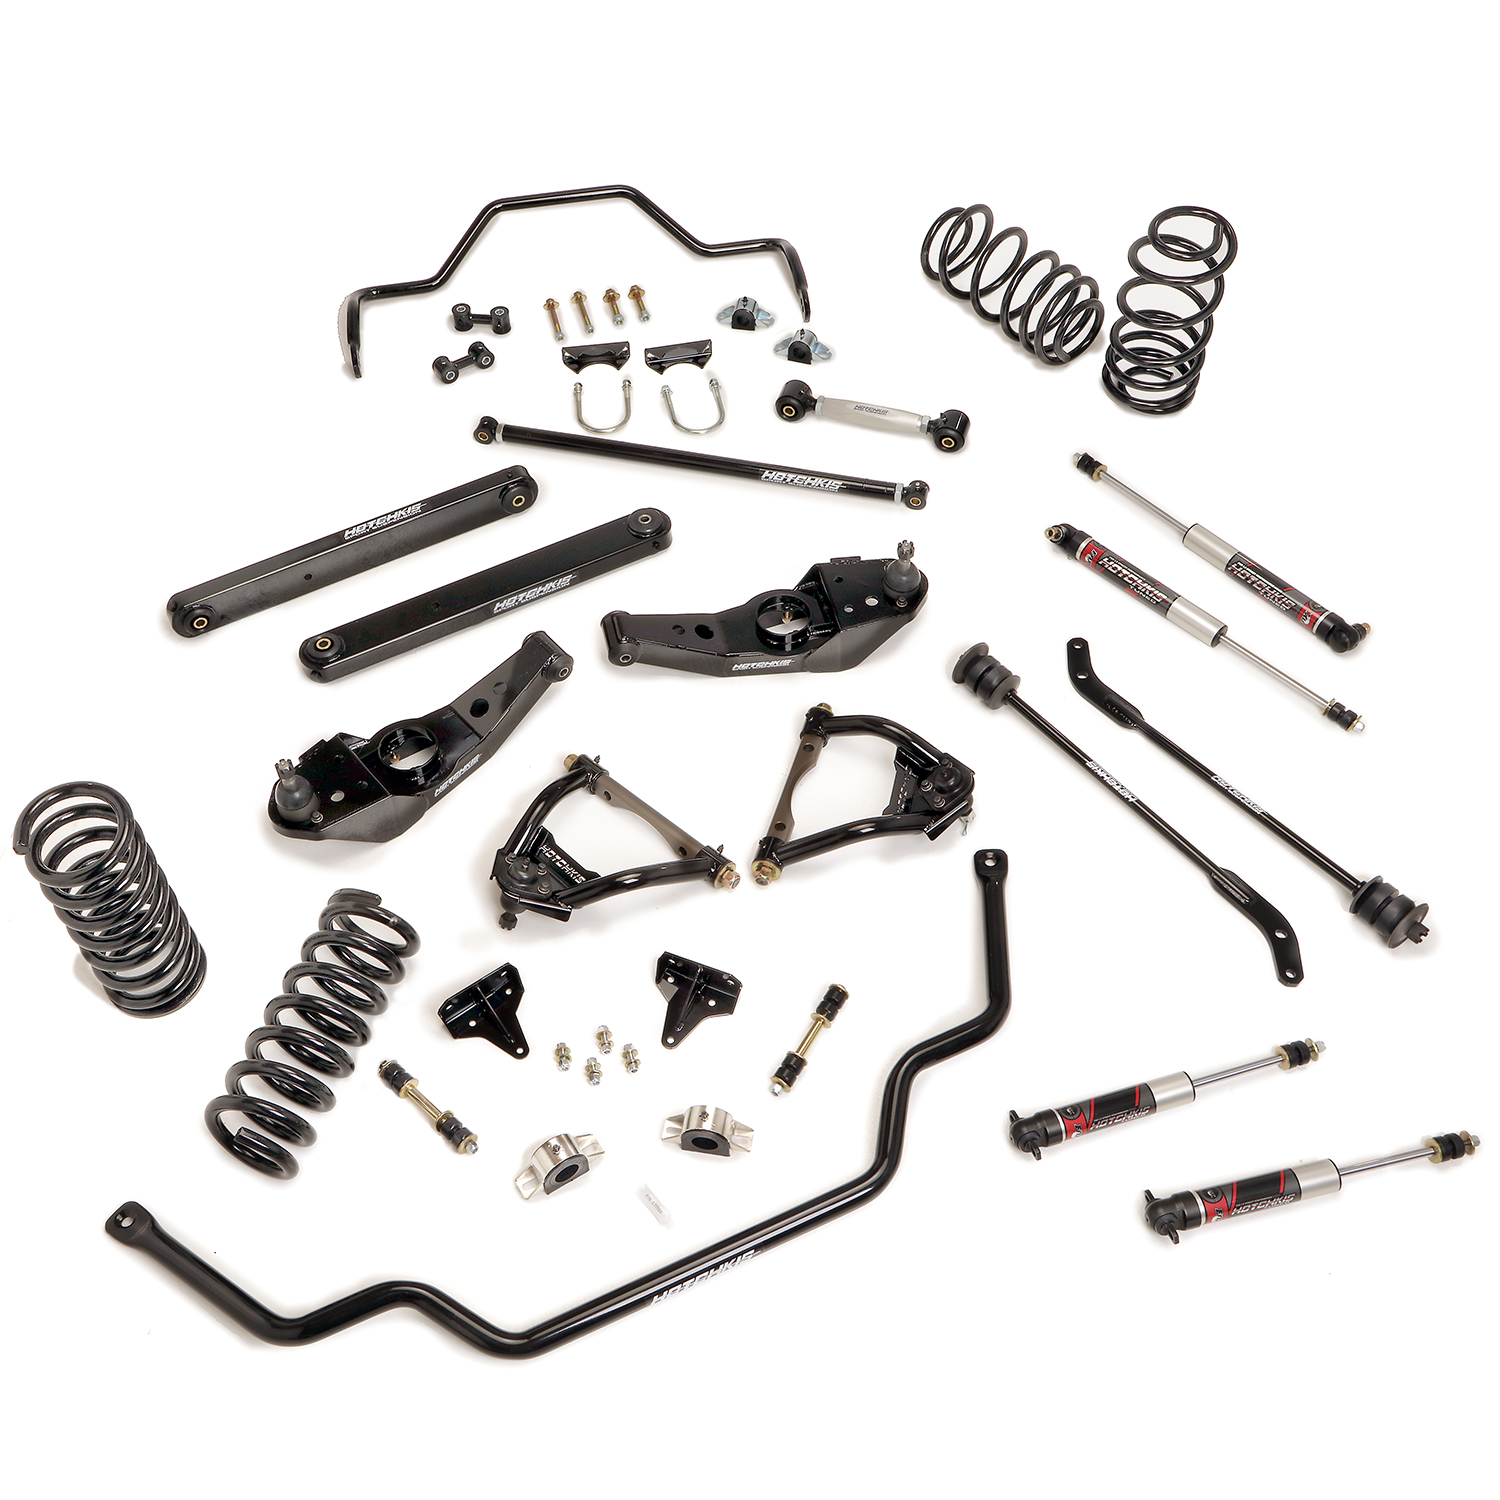 HOTCHKIS SPORT SUSPENSION SYSTEMS, PARTS, AND COMPLETE BOLT-IN PACKAGES